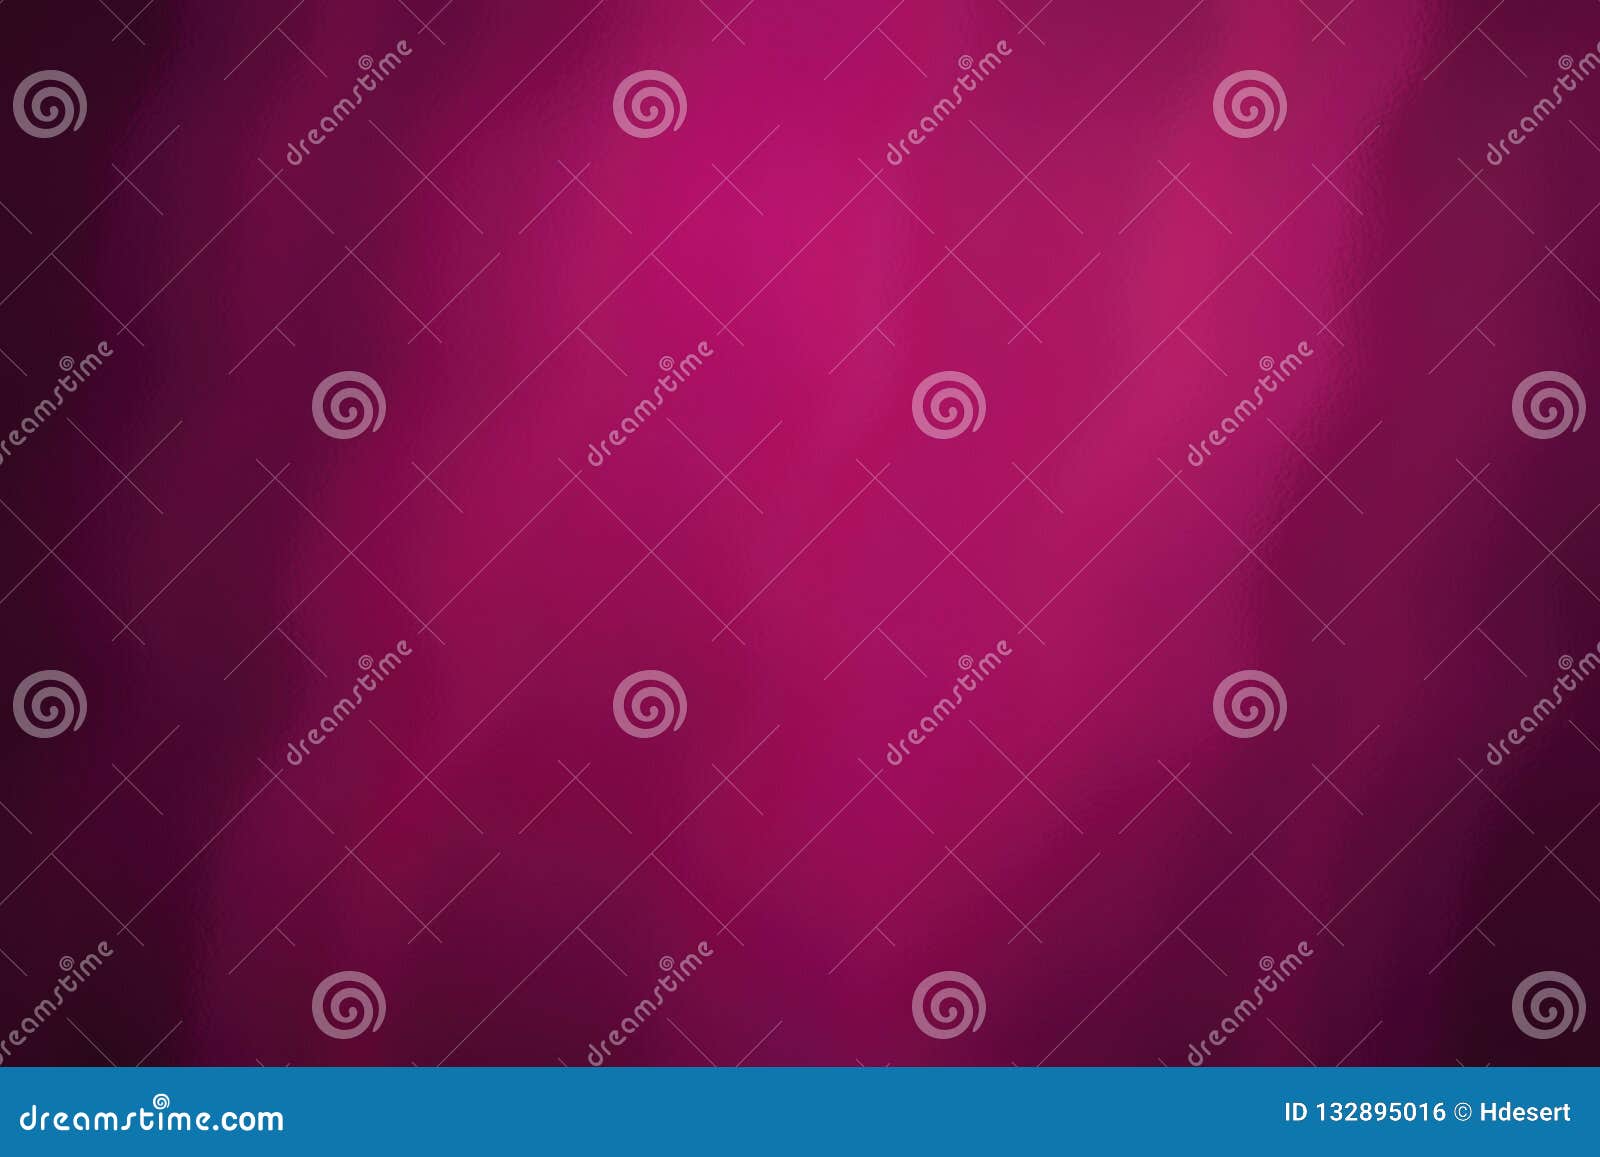 magenta abstract glass texture background,  pattern template